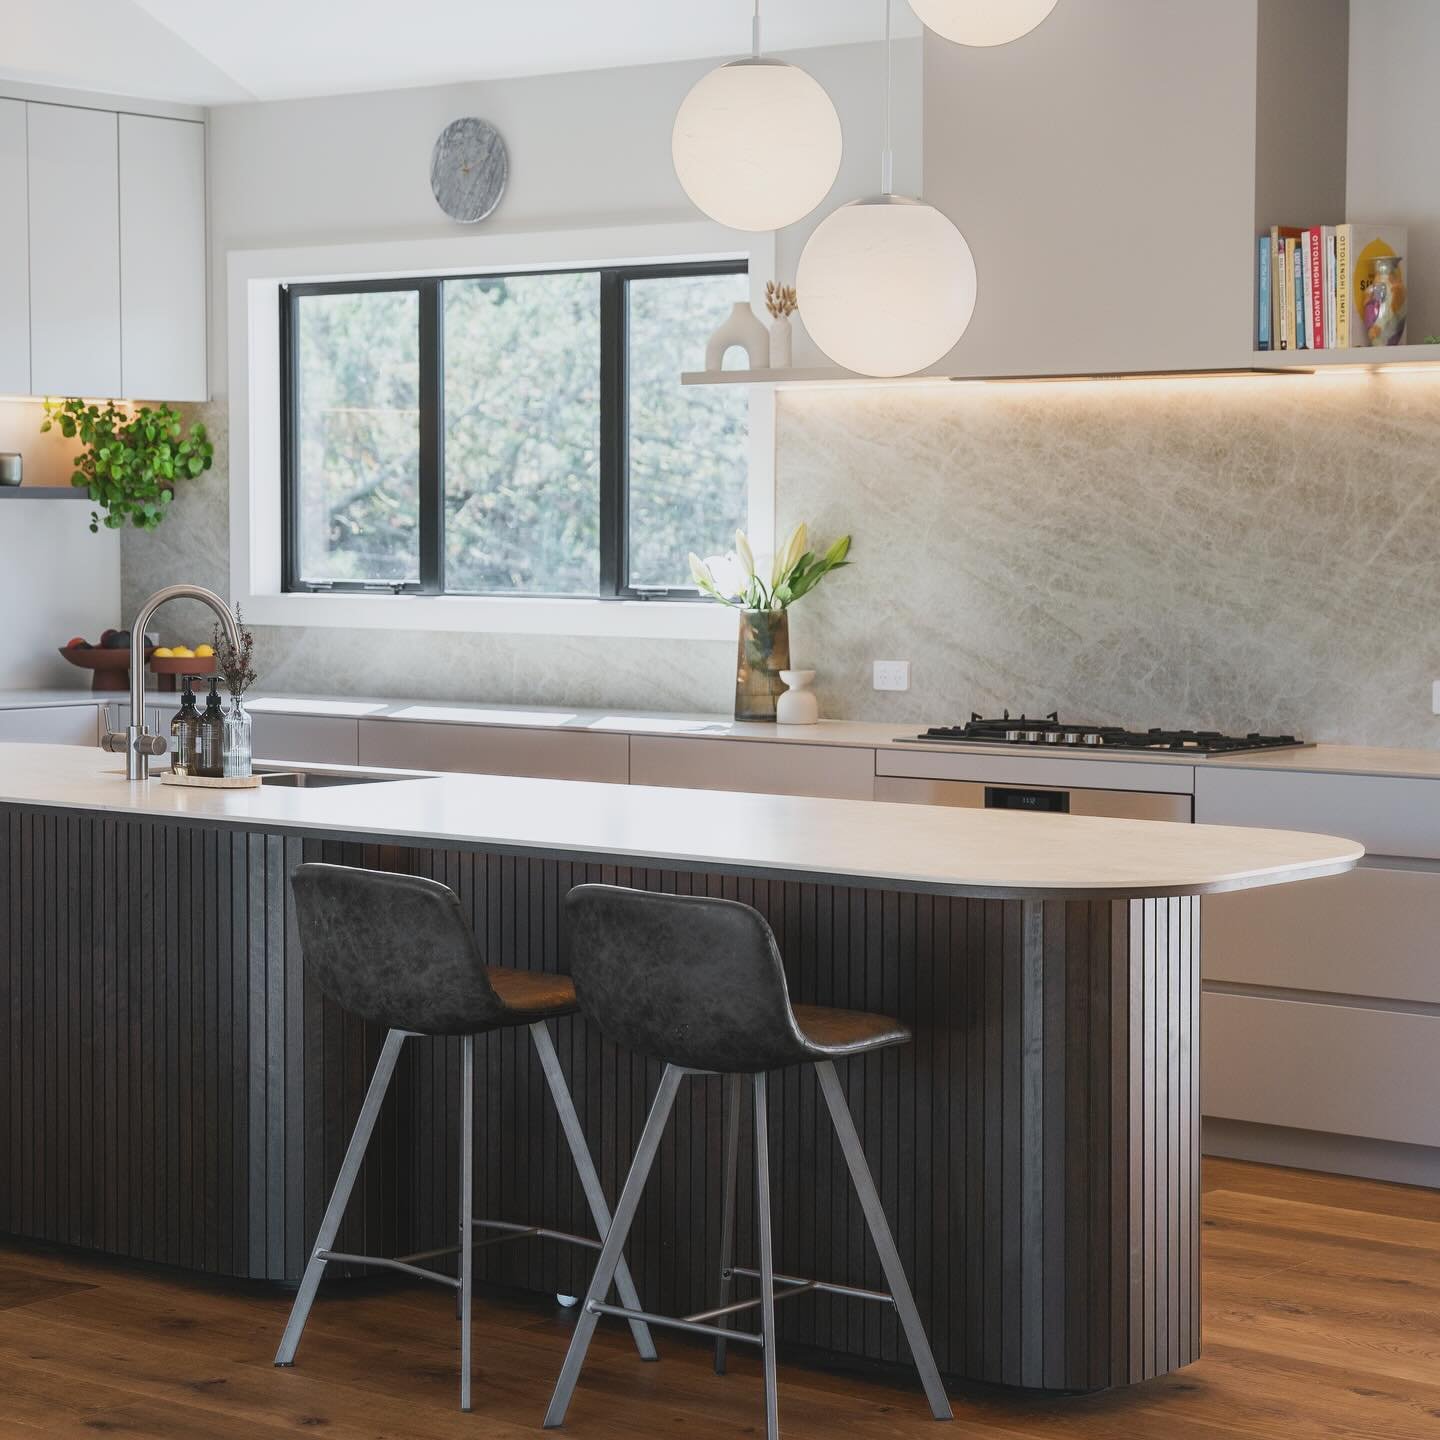 ✨Winner of TIDA Highly Commended Designer Kitchen of the Year Award ✨
Some very exciting news came just as I was about to reveal this stunning home, this kitchen wins an award amongst Australia&rsquo;s and New Zealand&rsquo;s finest designer kitchens